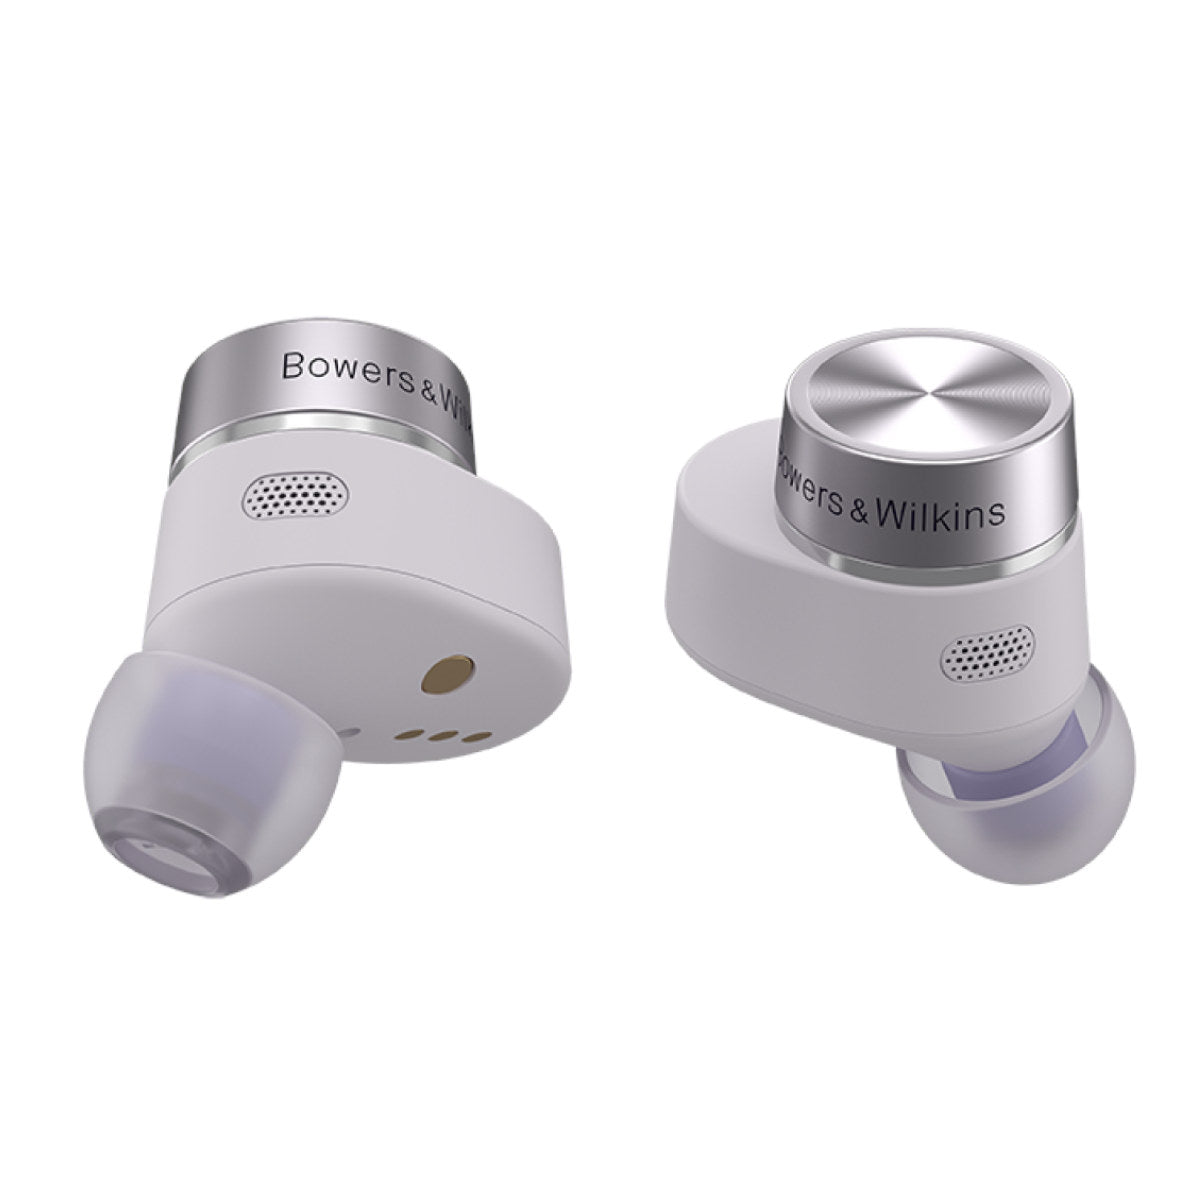 Bowers & Wilkins (B&W) Pi5 S2 In-ear True Wireless Earbuds (Spring Lilac) - Ooberpad India